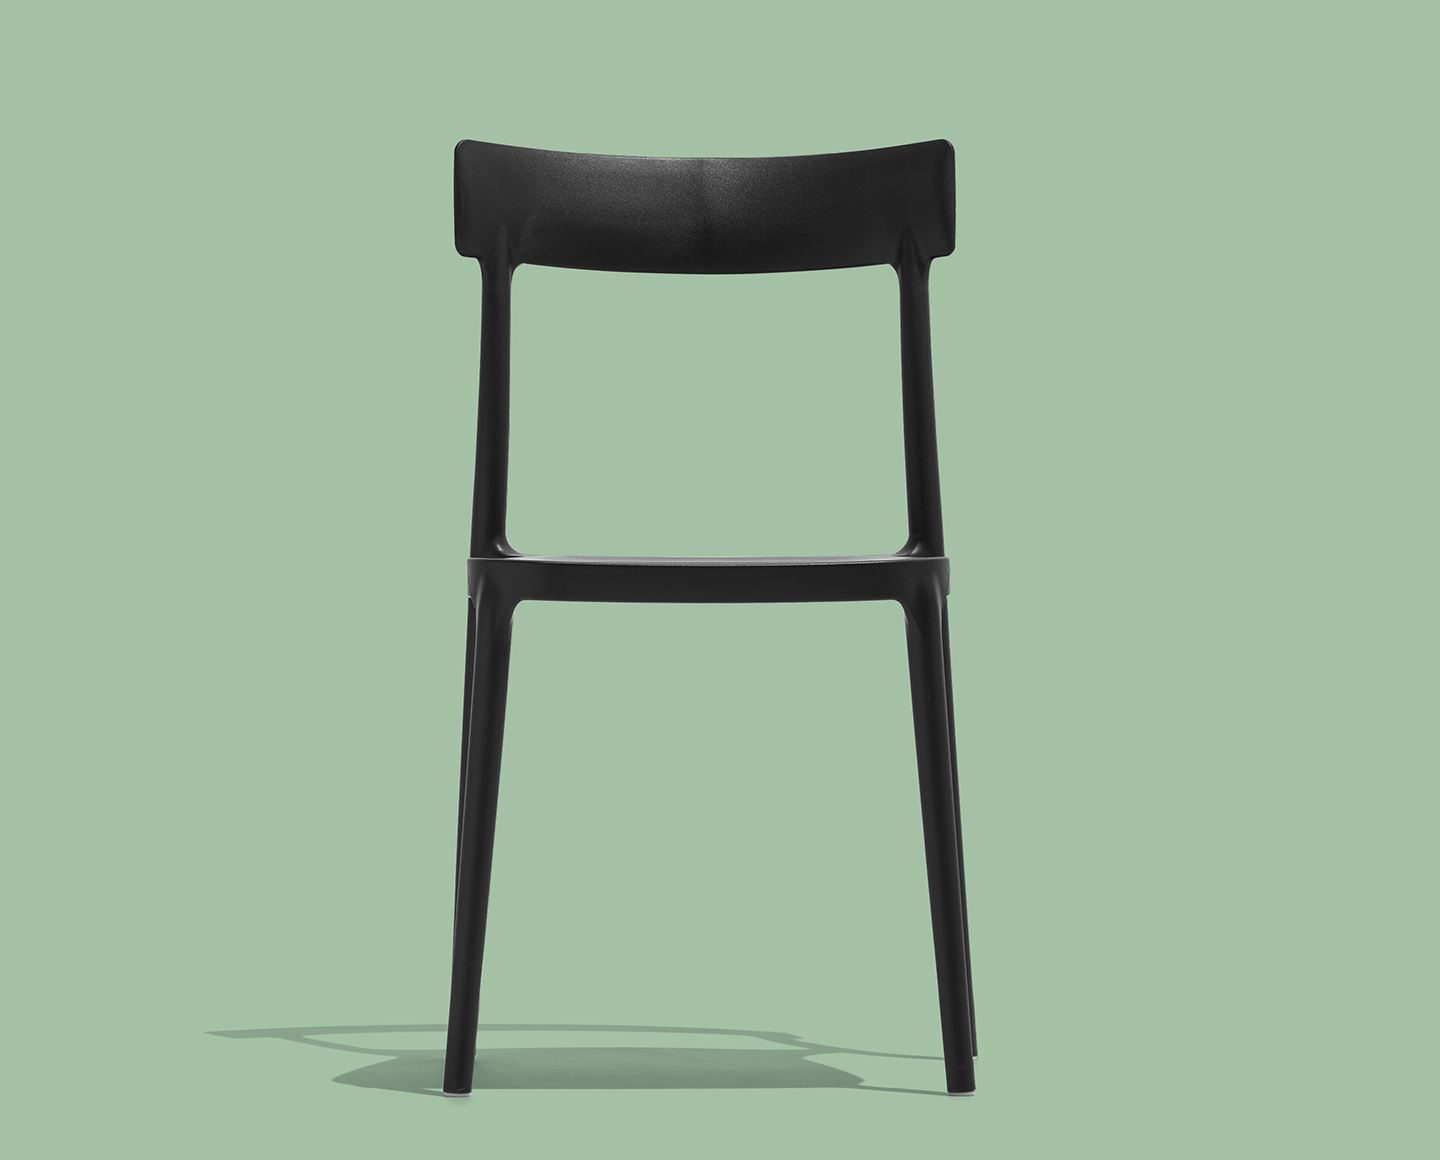 Belgica Furniture - Calligaris by Argo (Model Chair Connubia CB1523) from